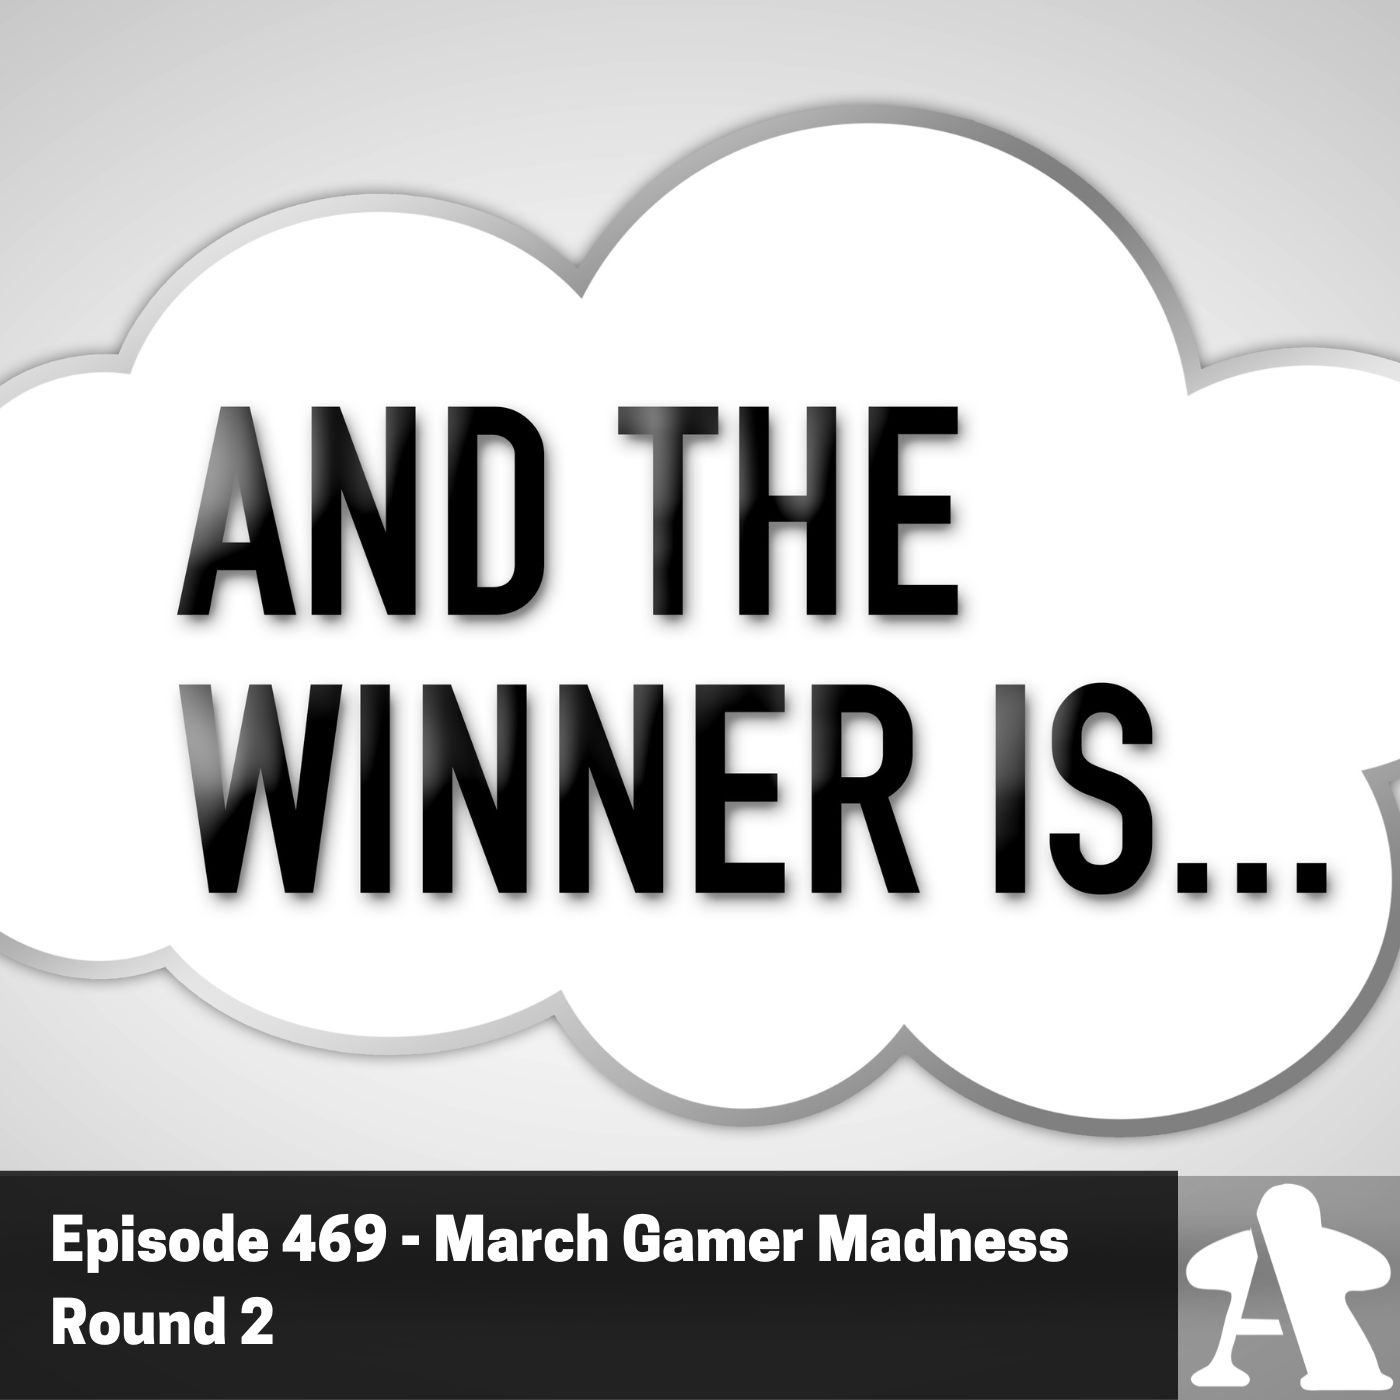 Episode 469 - March Gamer Madness Round 2